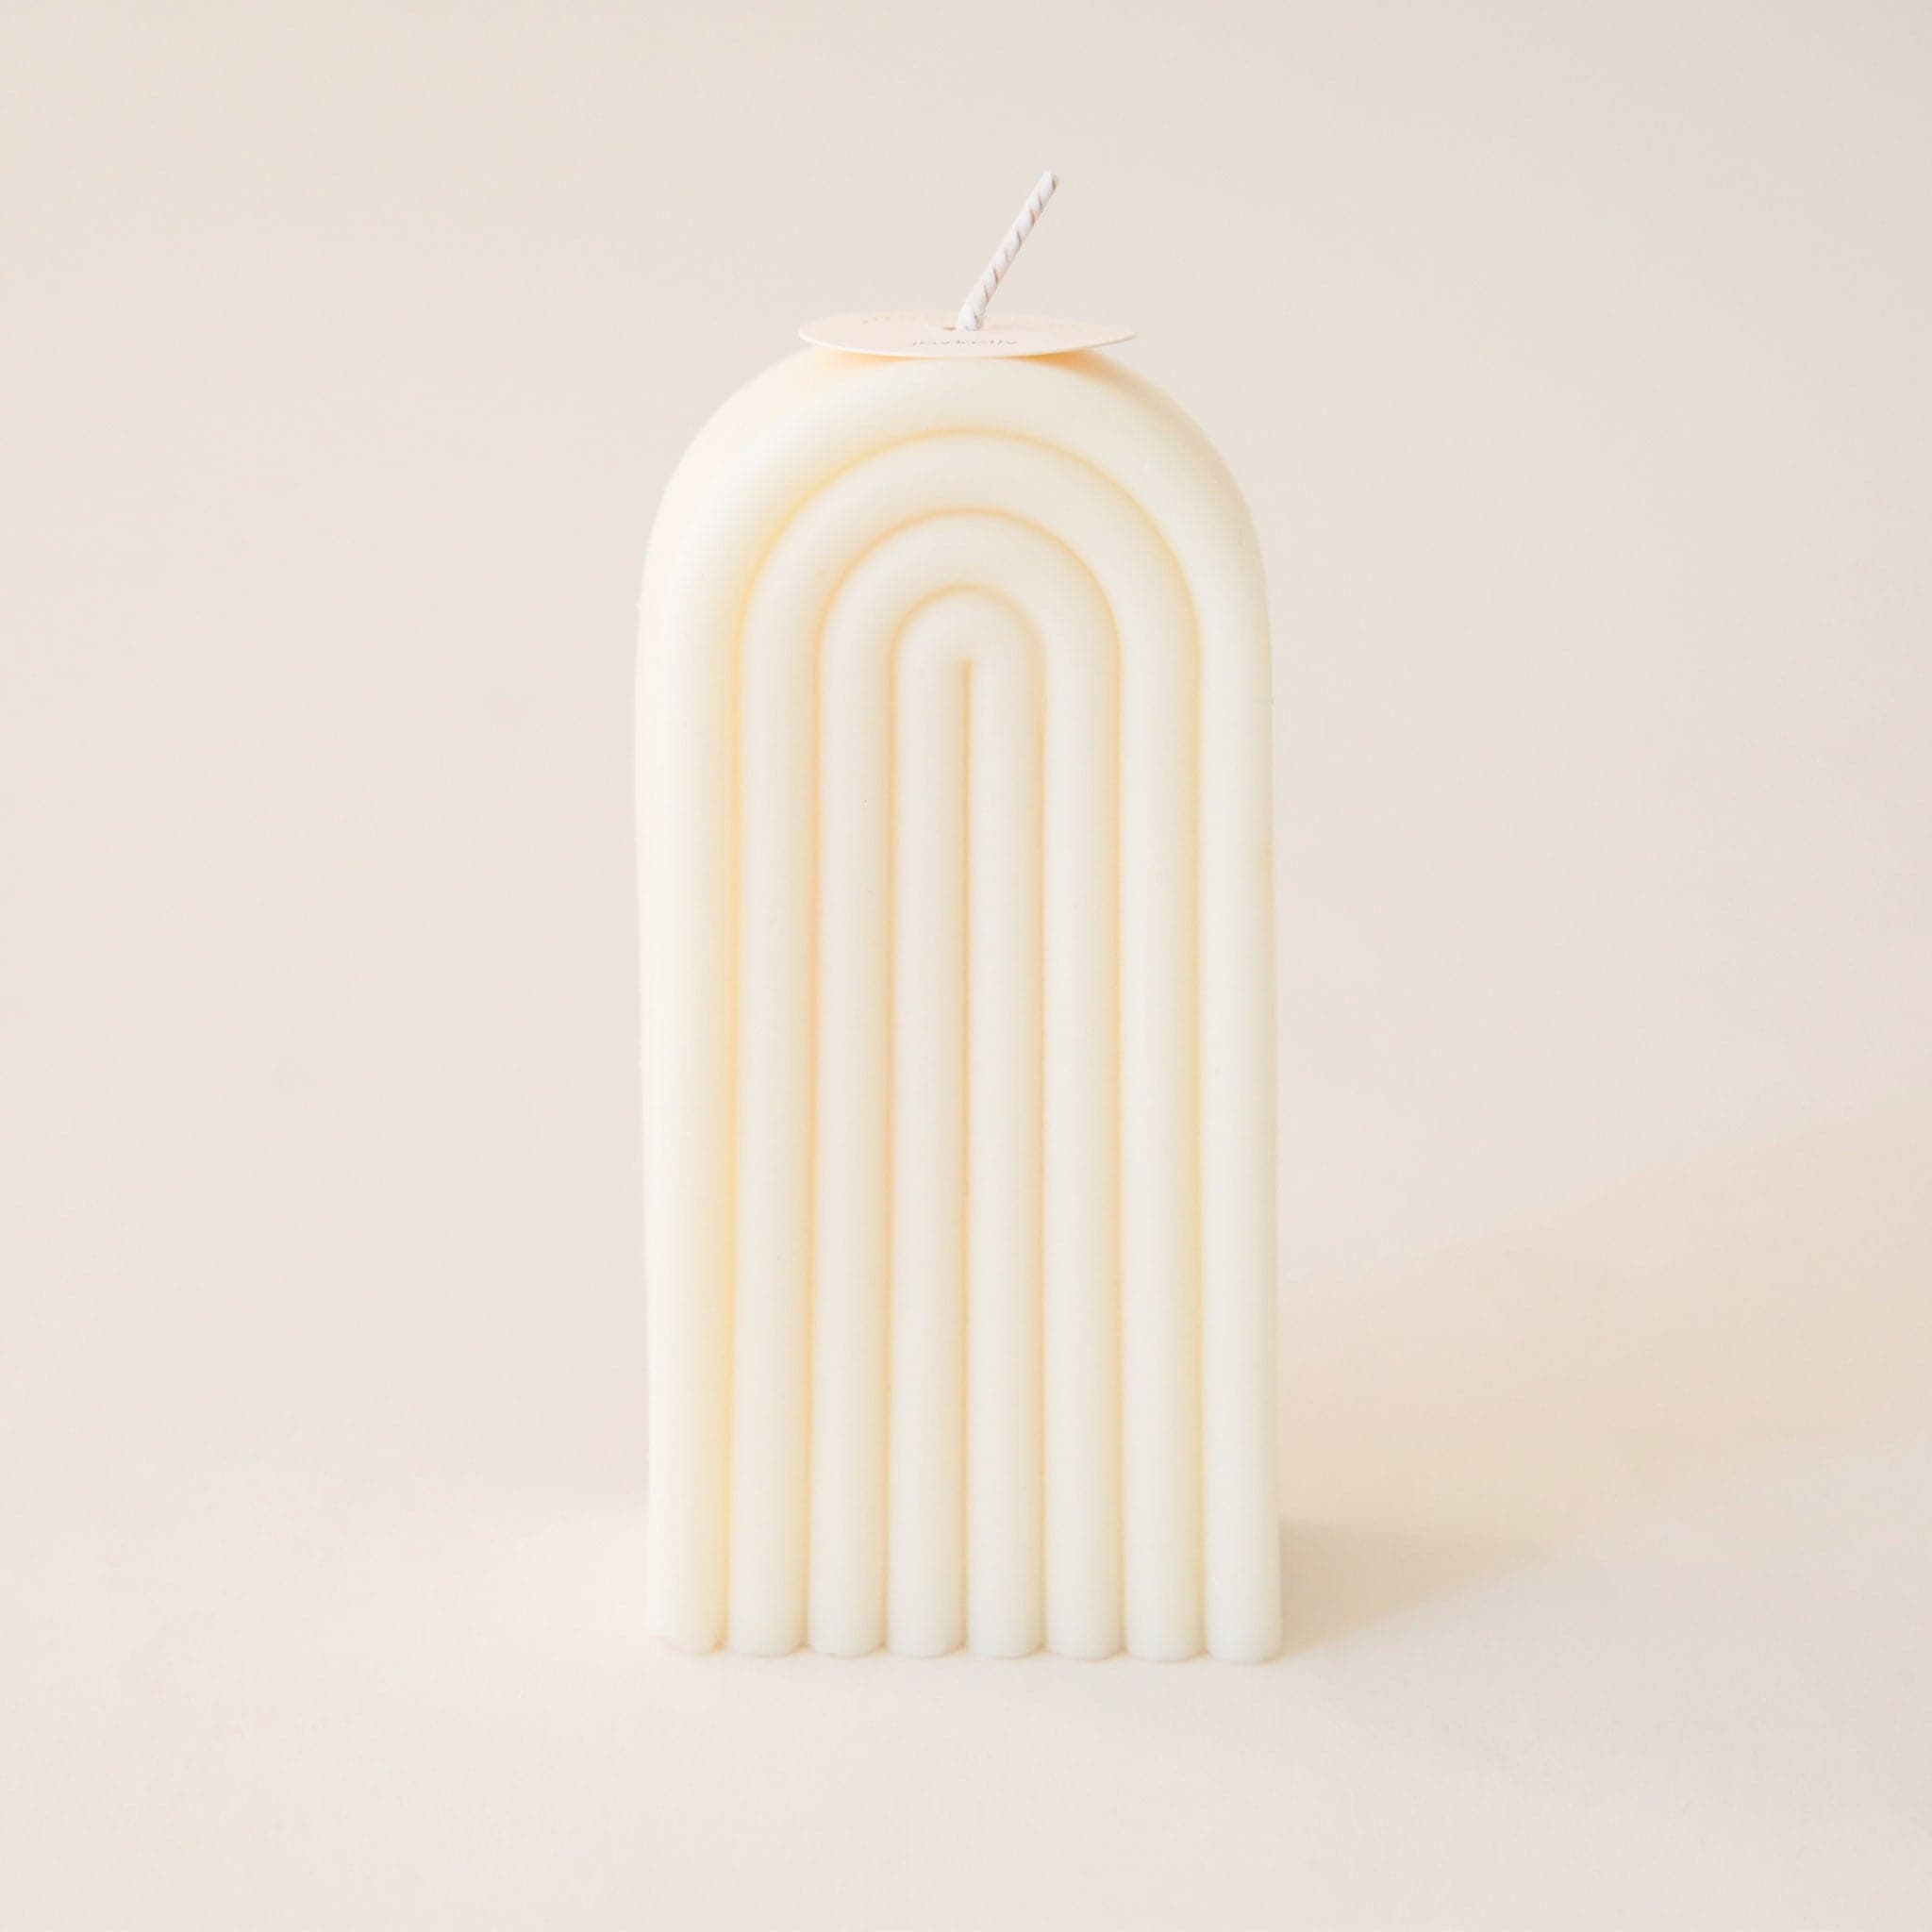 Single tall, arch shaped candle. The candle is carved with rainbow-shaped curves and has a white wick sprouting from the top.